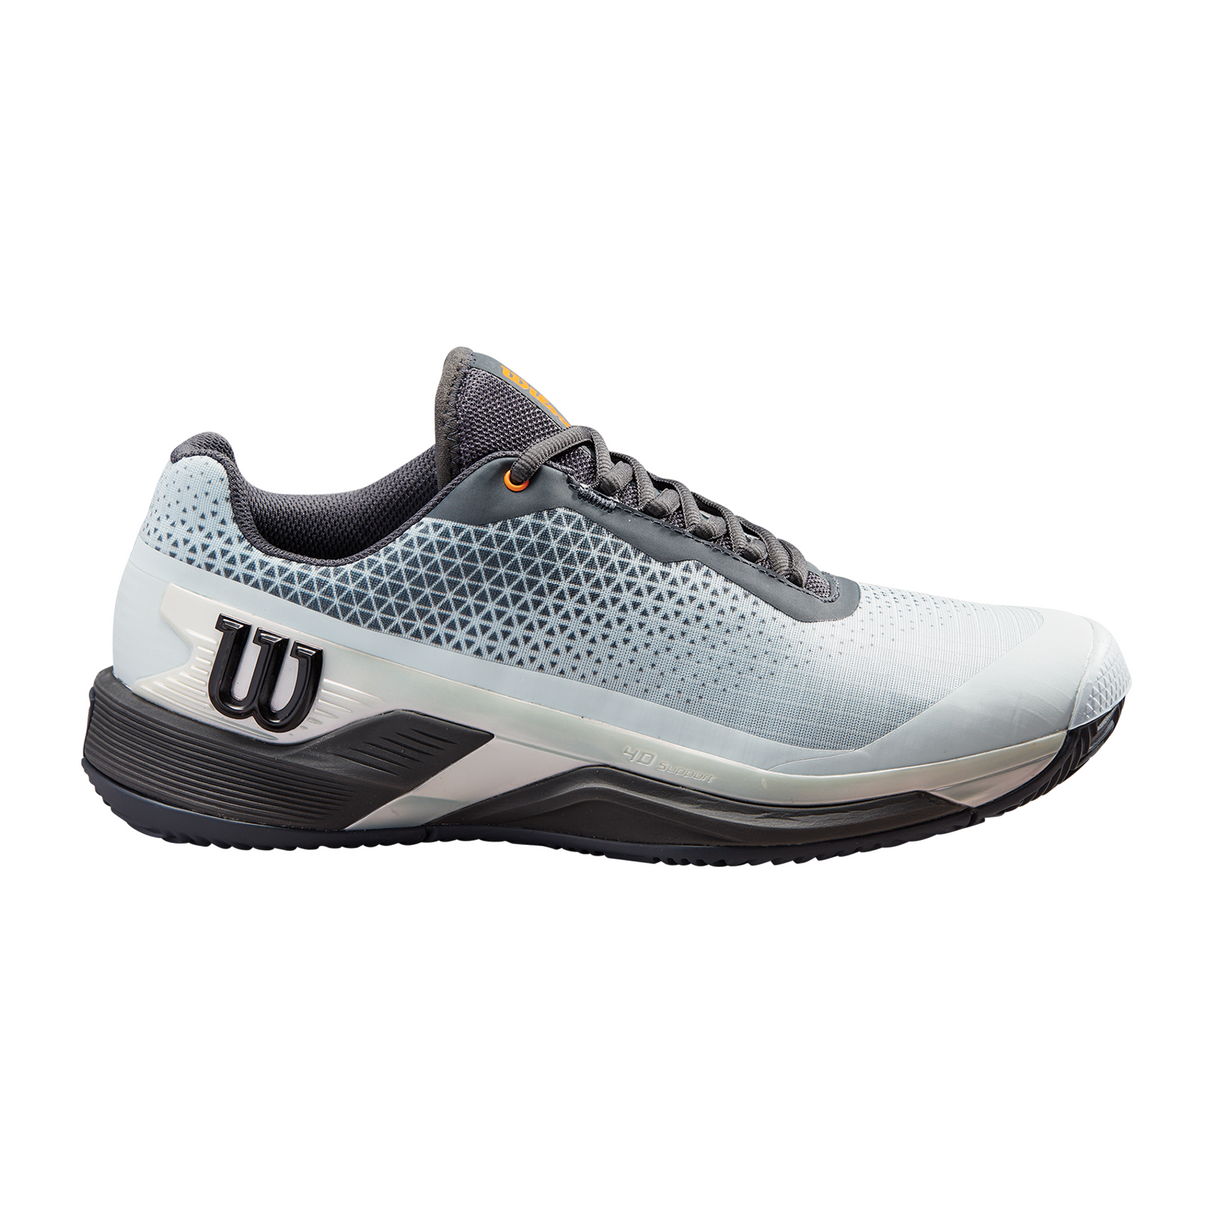 Rush Pro 4.0 Clay Court Tennis Shoes (Ladies) - Shift Edition